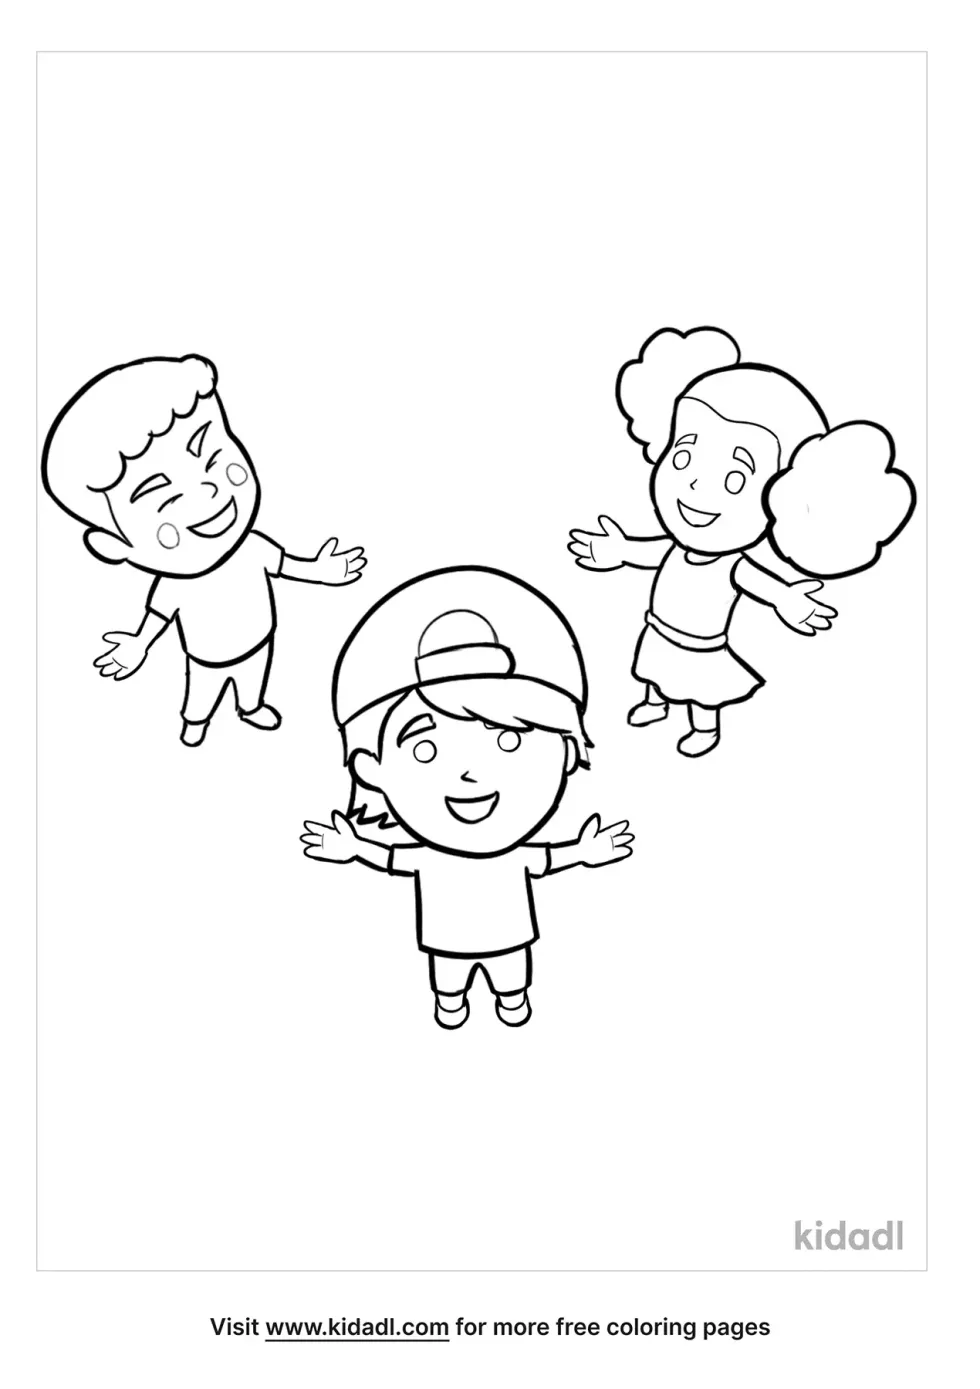 3 Children Coloring Page